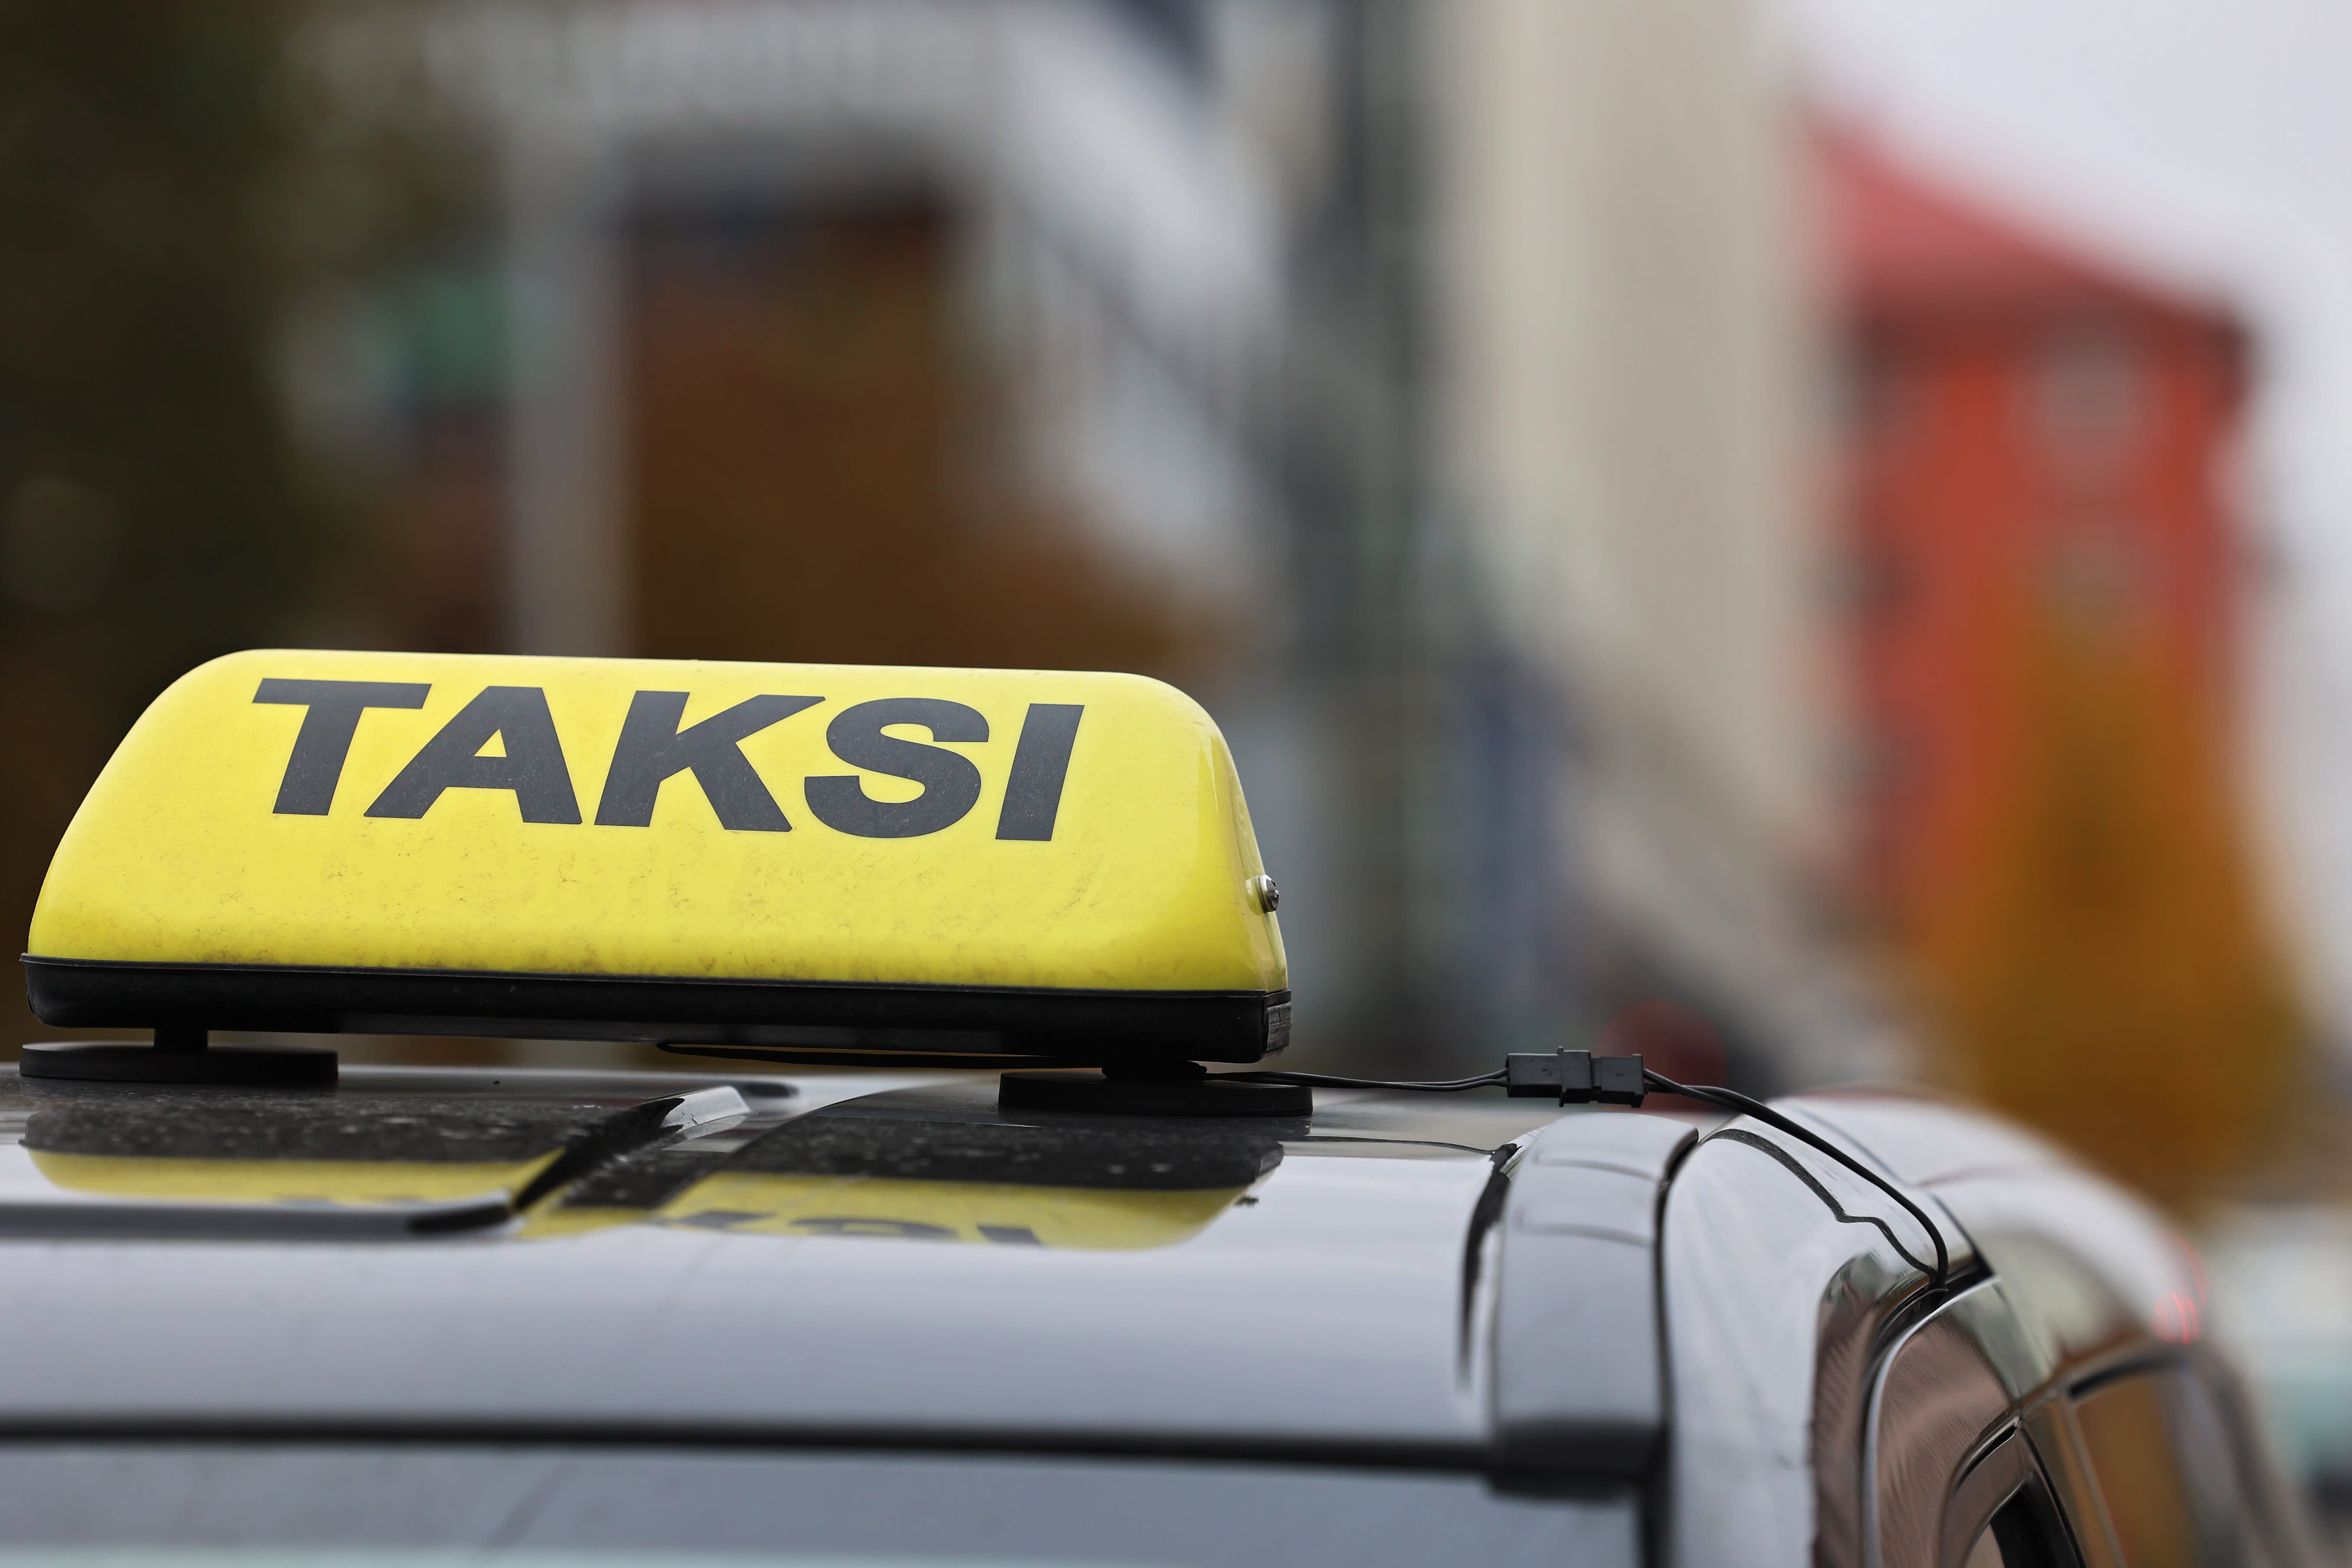 Helsinki plans "urgently" solve problems at the central station's taxi rank